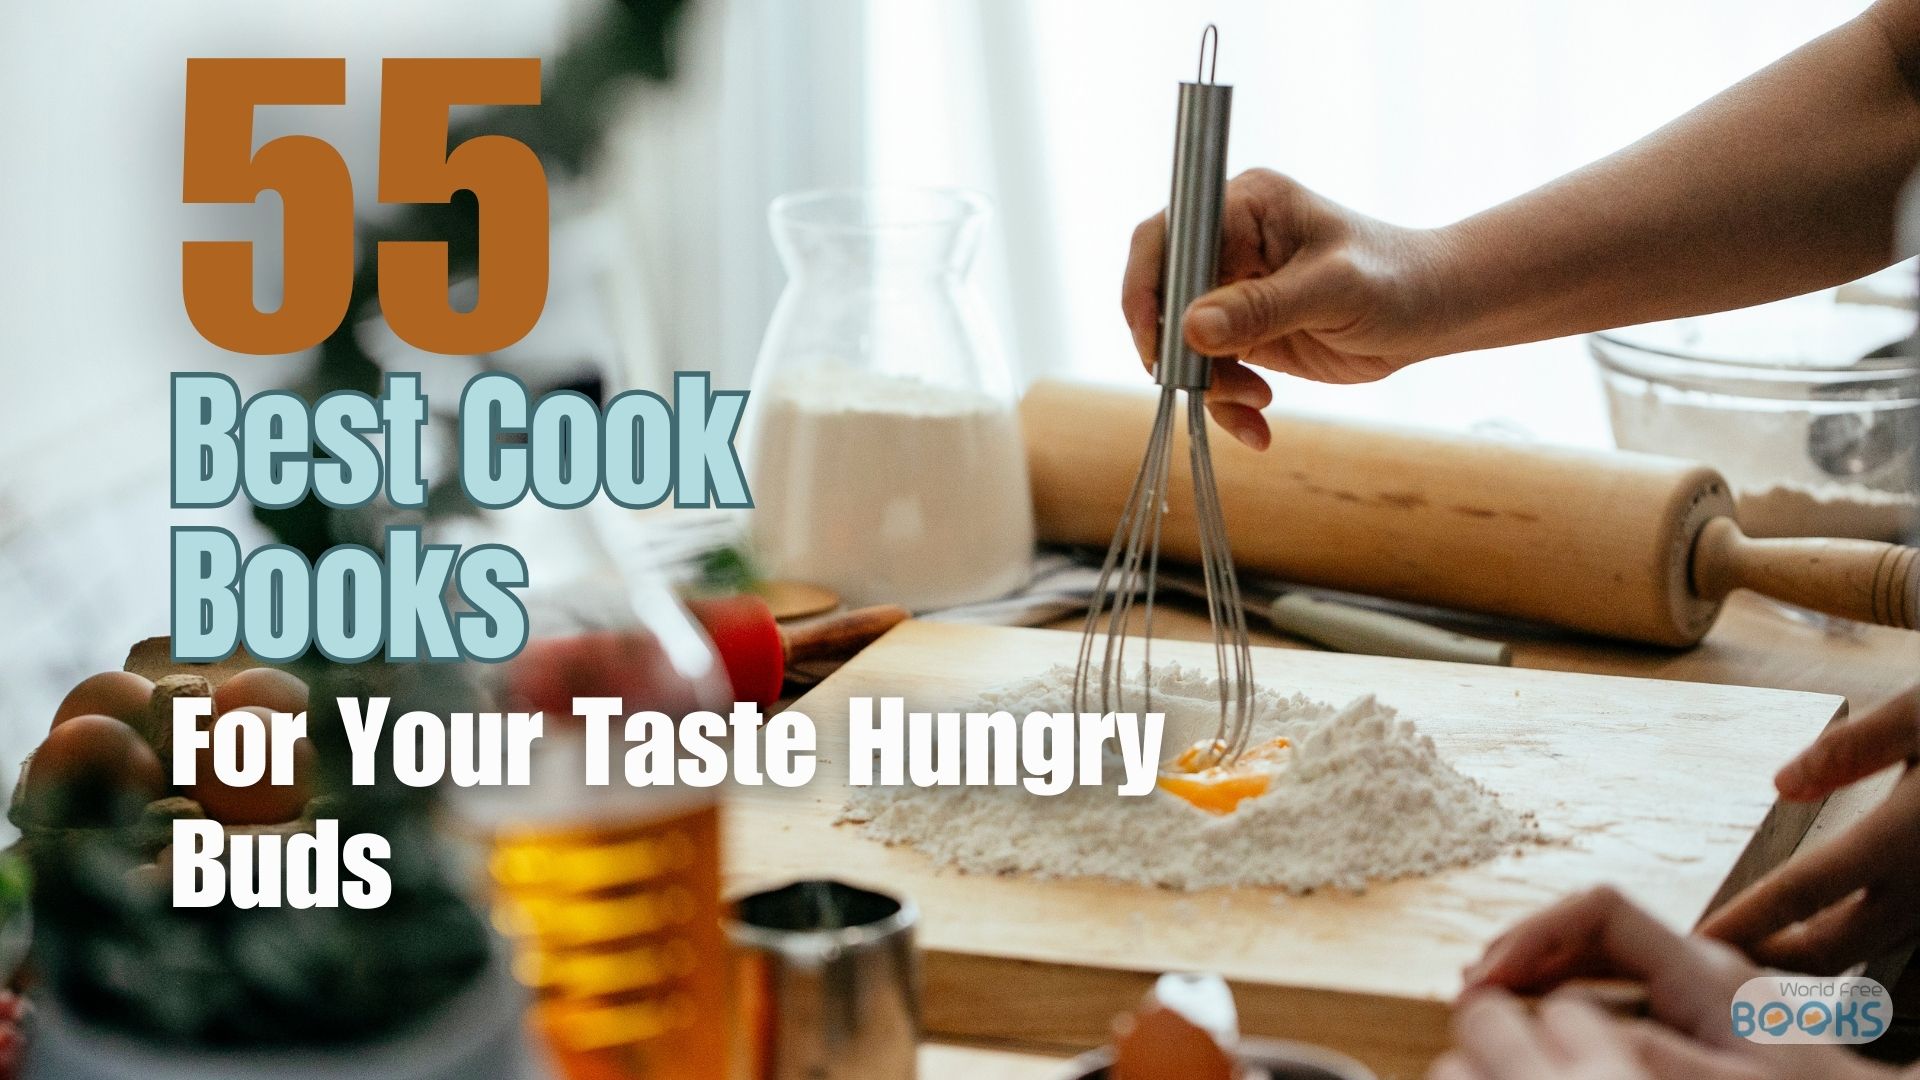 55 Best Cook Books For Your Taste Hungry Buds